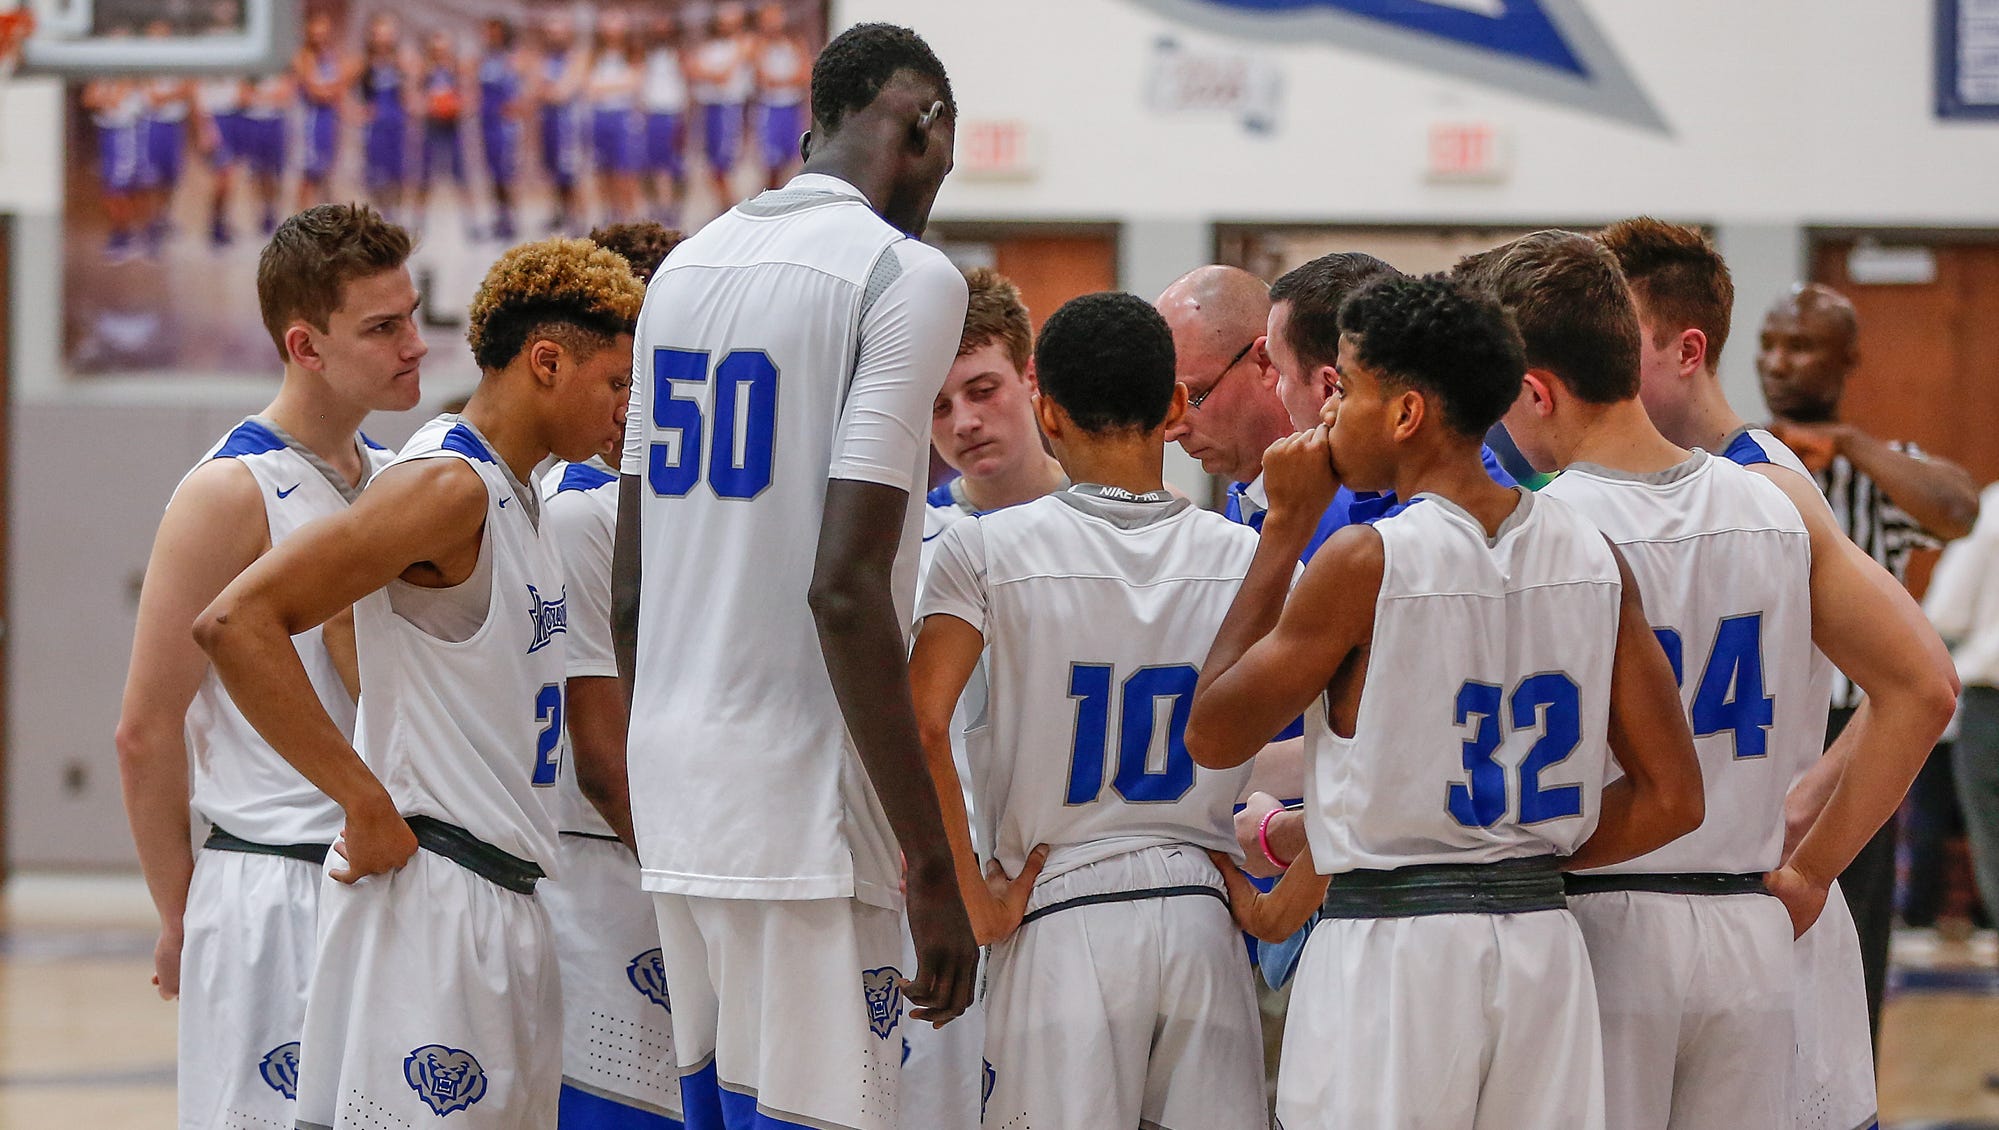 Hamilton Southeastern Royals center Mabor Majak (50) towers over his junior varsity teammates in a huddle just before tip-off against the New Castle Trojans on Tuesday, Feb. 7, 2017. Majak is freshman and stands 7 feet 1 inch tall. Mykal McEldowney/IndyStar